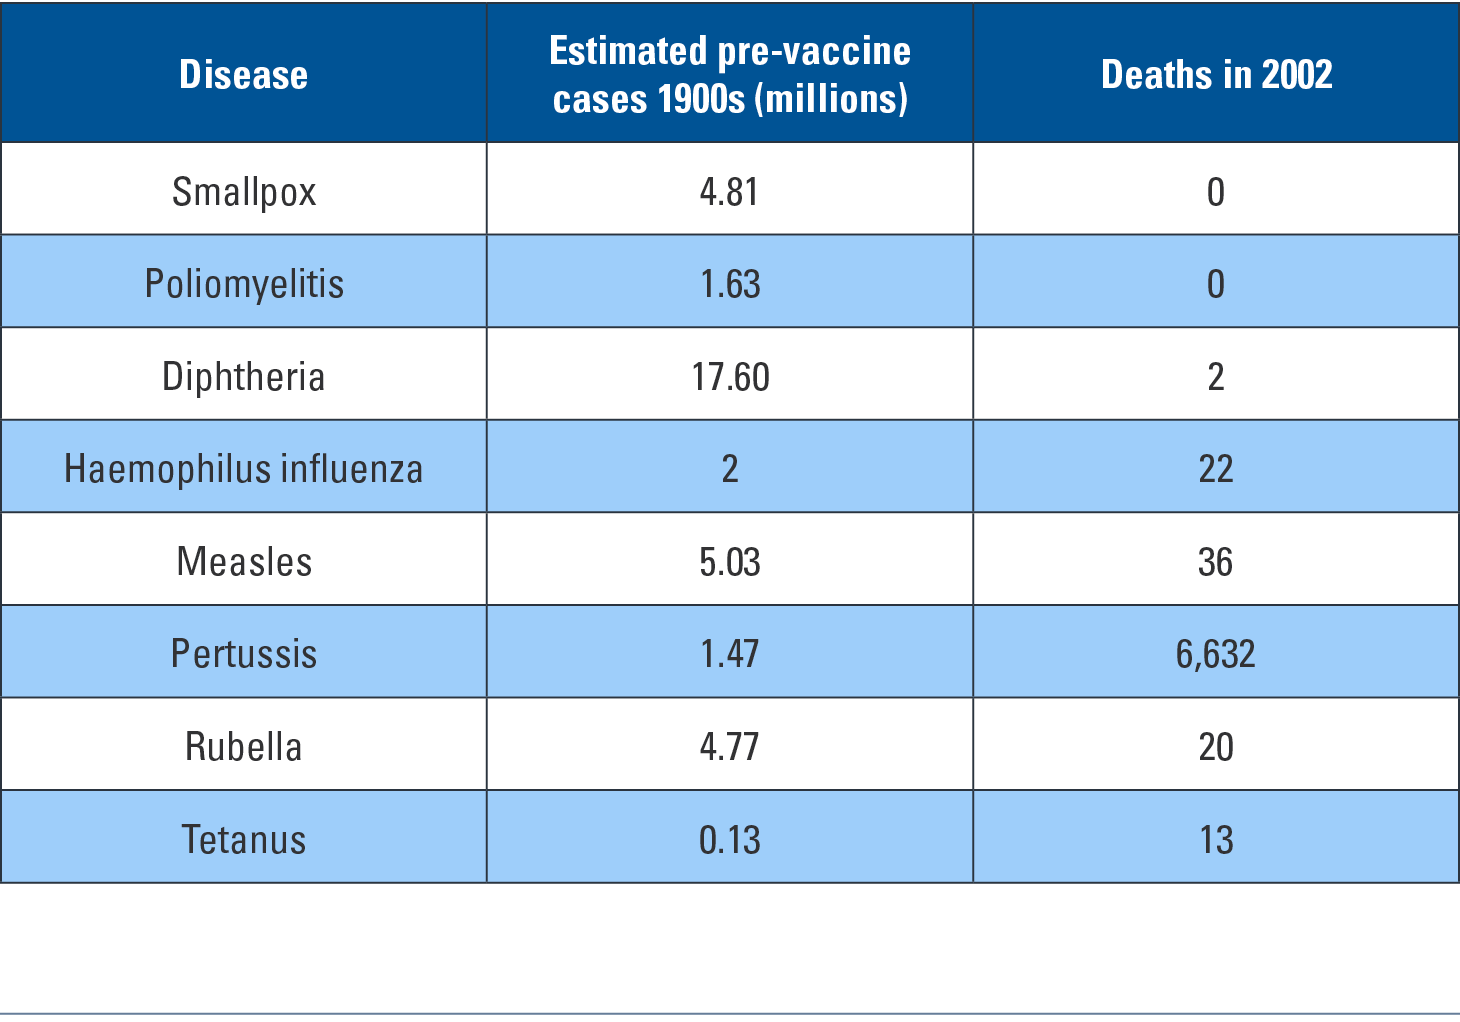 Data from Centers for Disease Control and Prevention